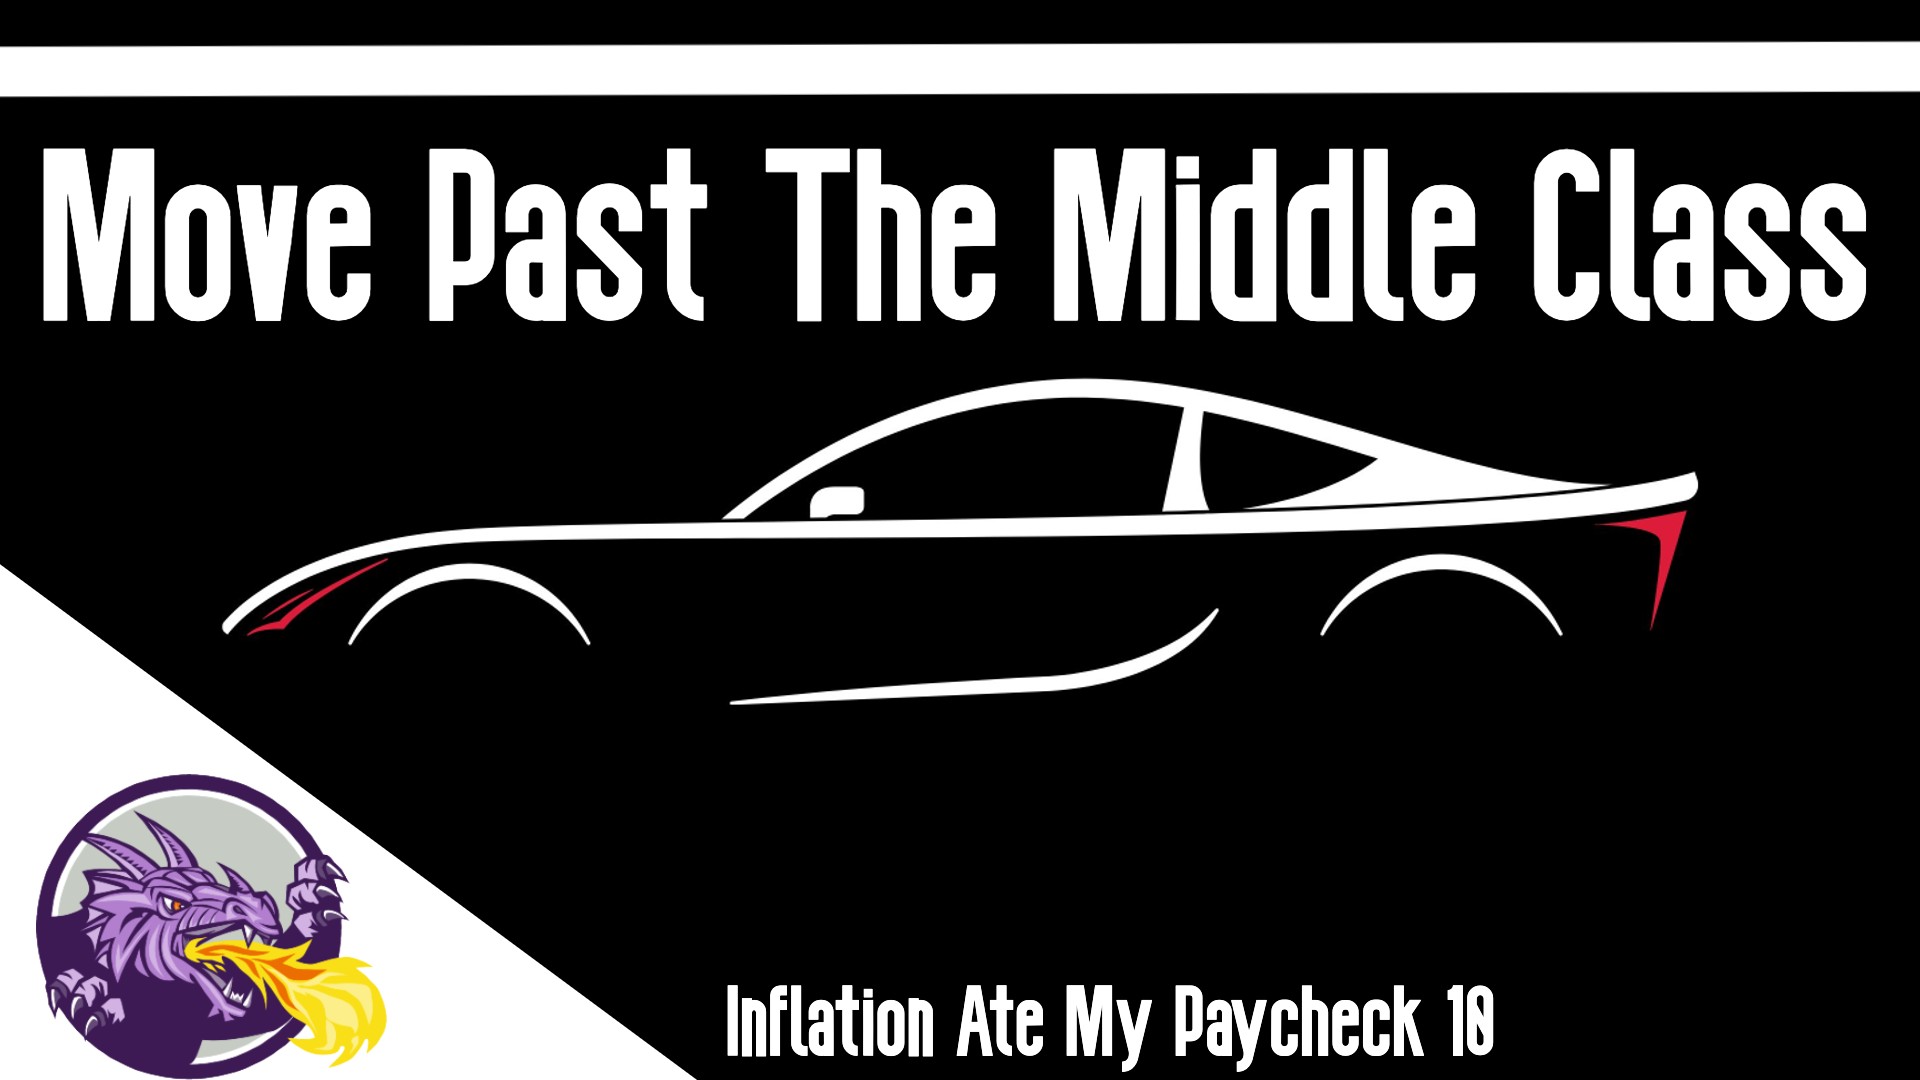 Inflation Ate My Paycheck 110: Get Past the Middle Class